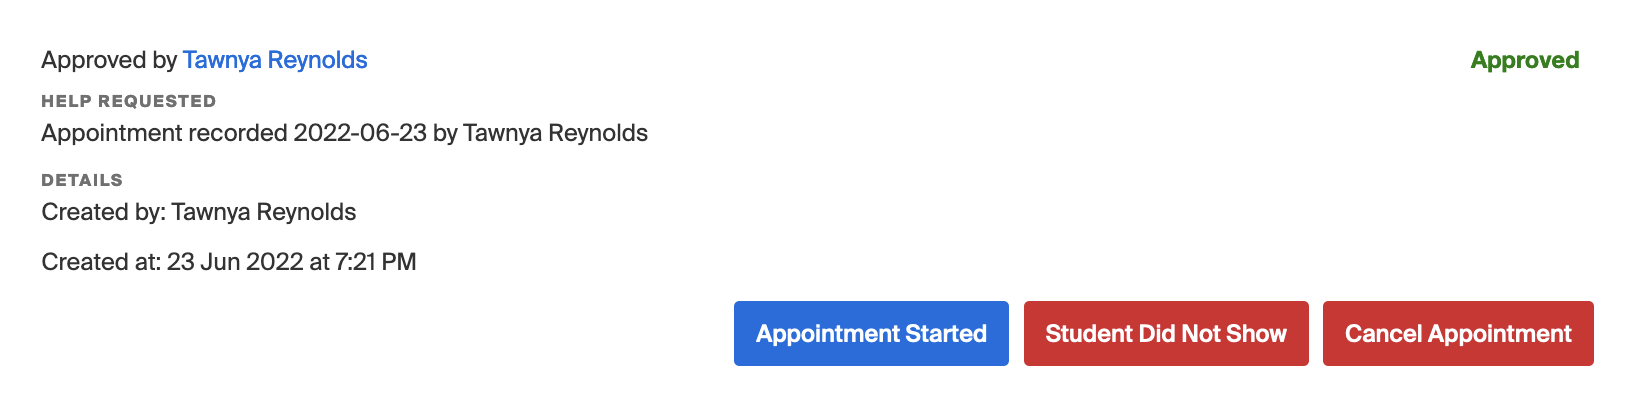 Appointment_Buttons.png